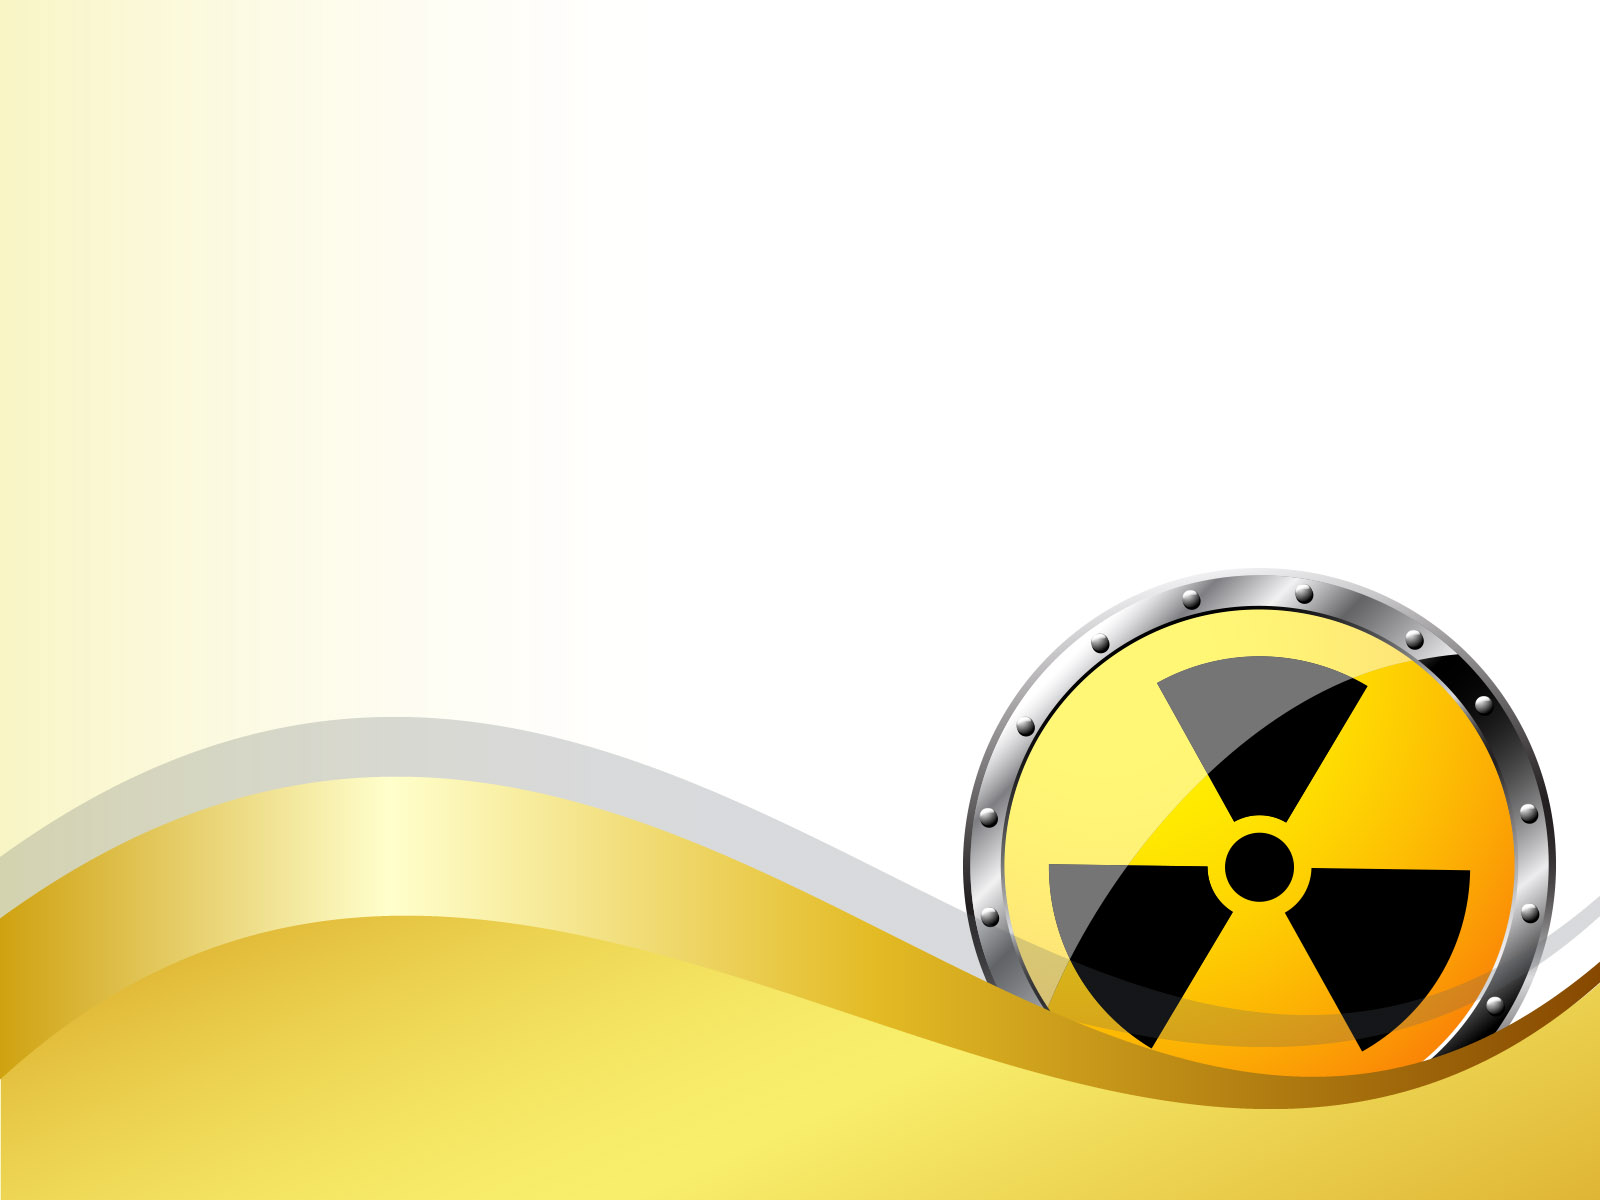 nuclear powerpoint template